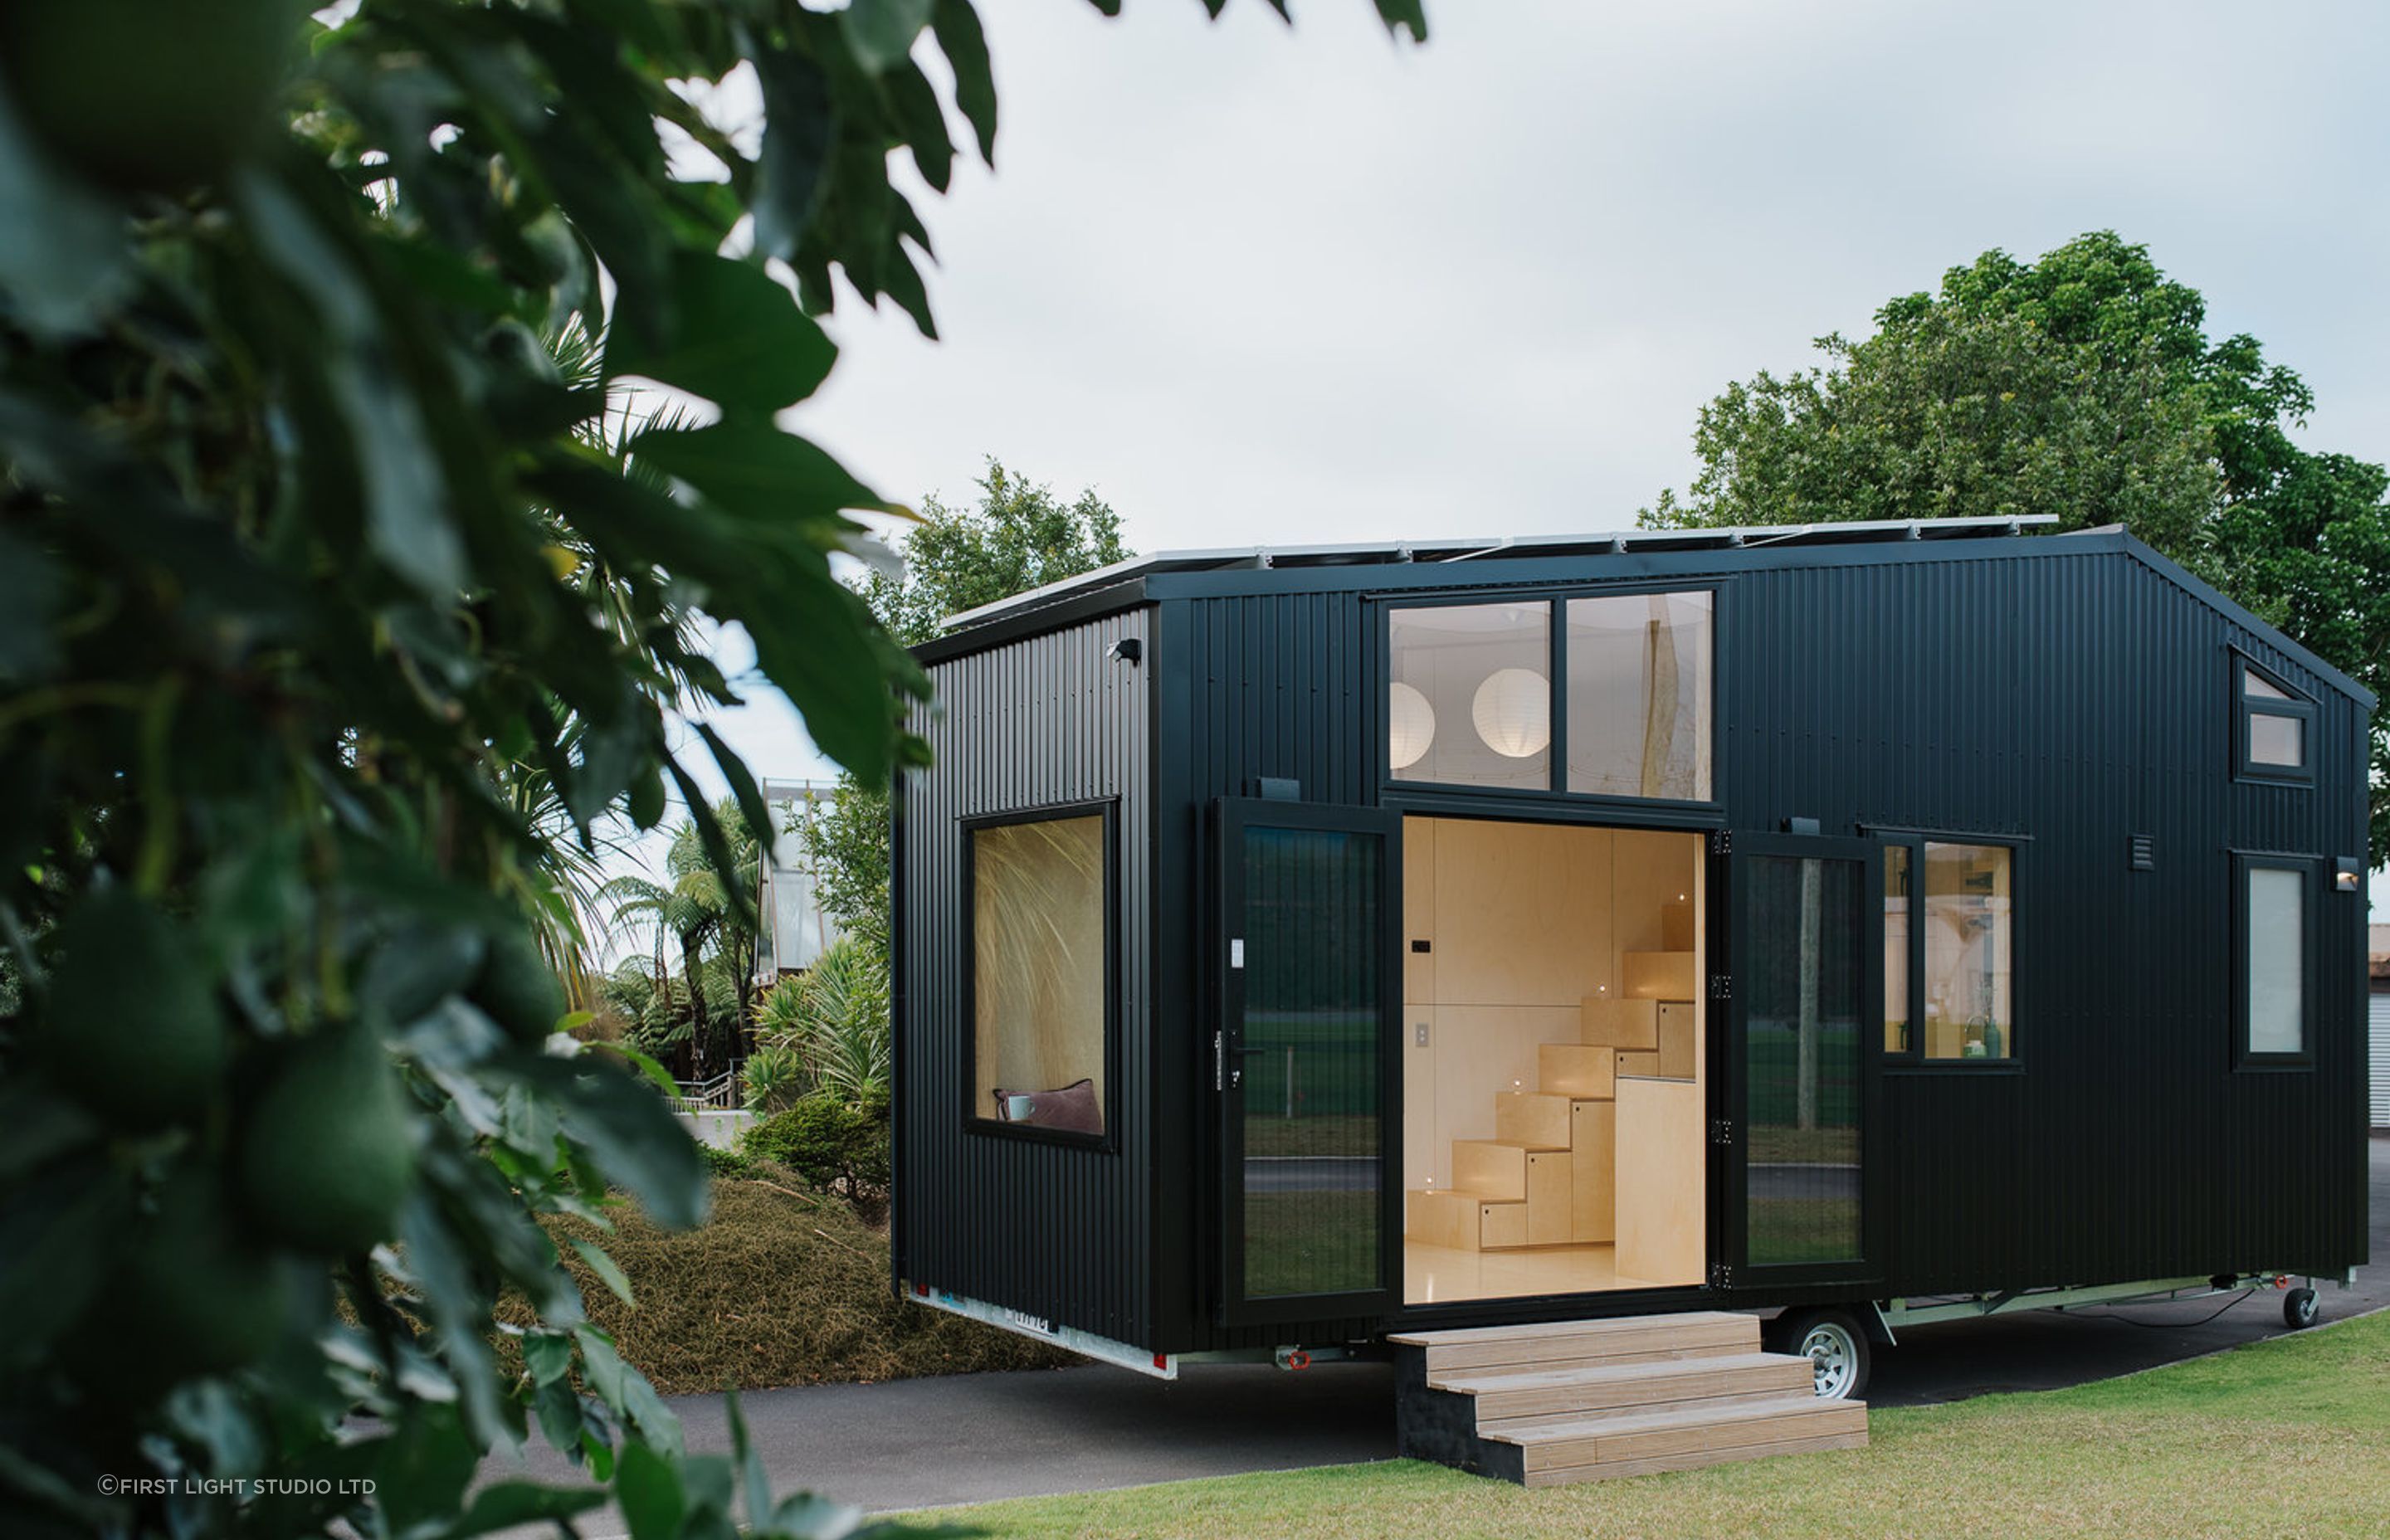 An exquisite example of a tiny home on wheels (THOW) in a coastal site close to Wellington.